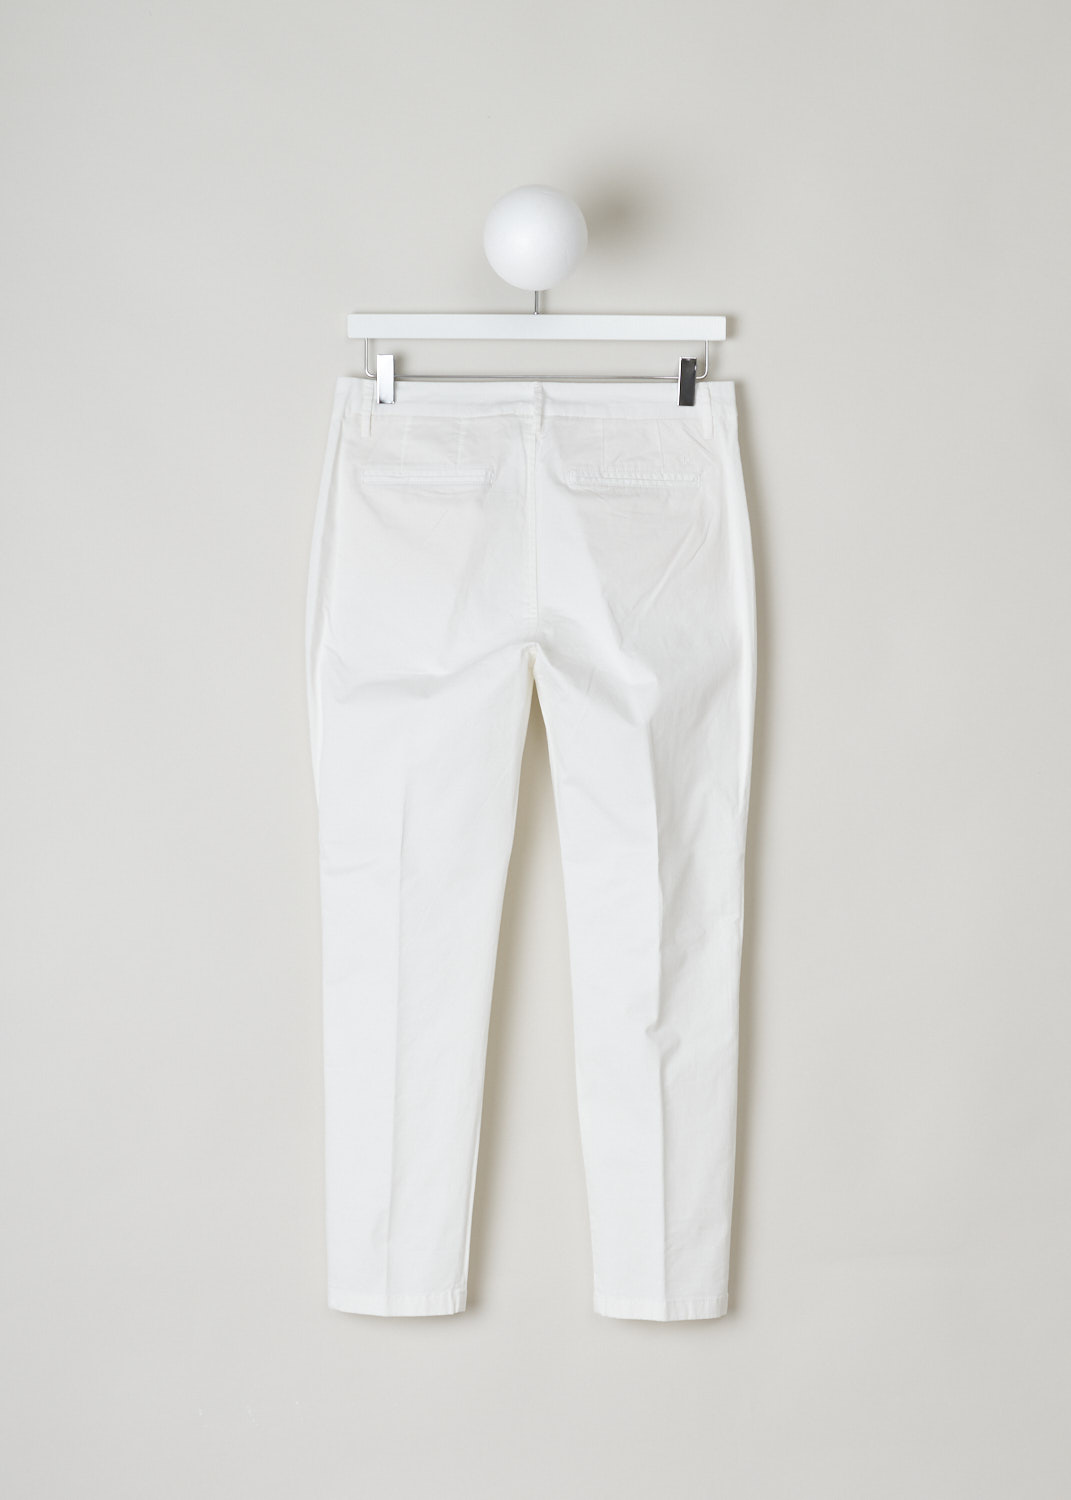 Closed, White flat front chino, jack_C91012_30D_20_218, white, back, This white flat front chino is one of those must have basics that goes well anything you throw on it. Featuring a regular length, two forward slanted pockets on the front and two welt pockets on the back.